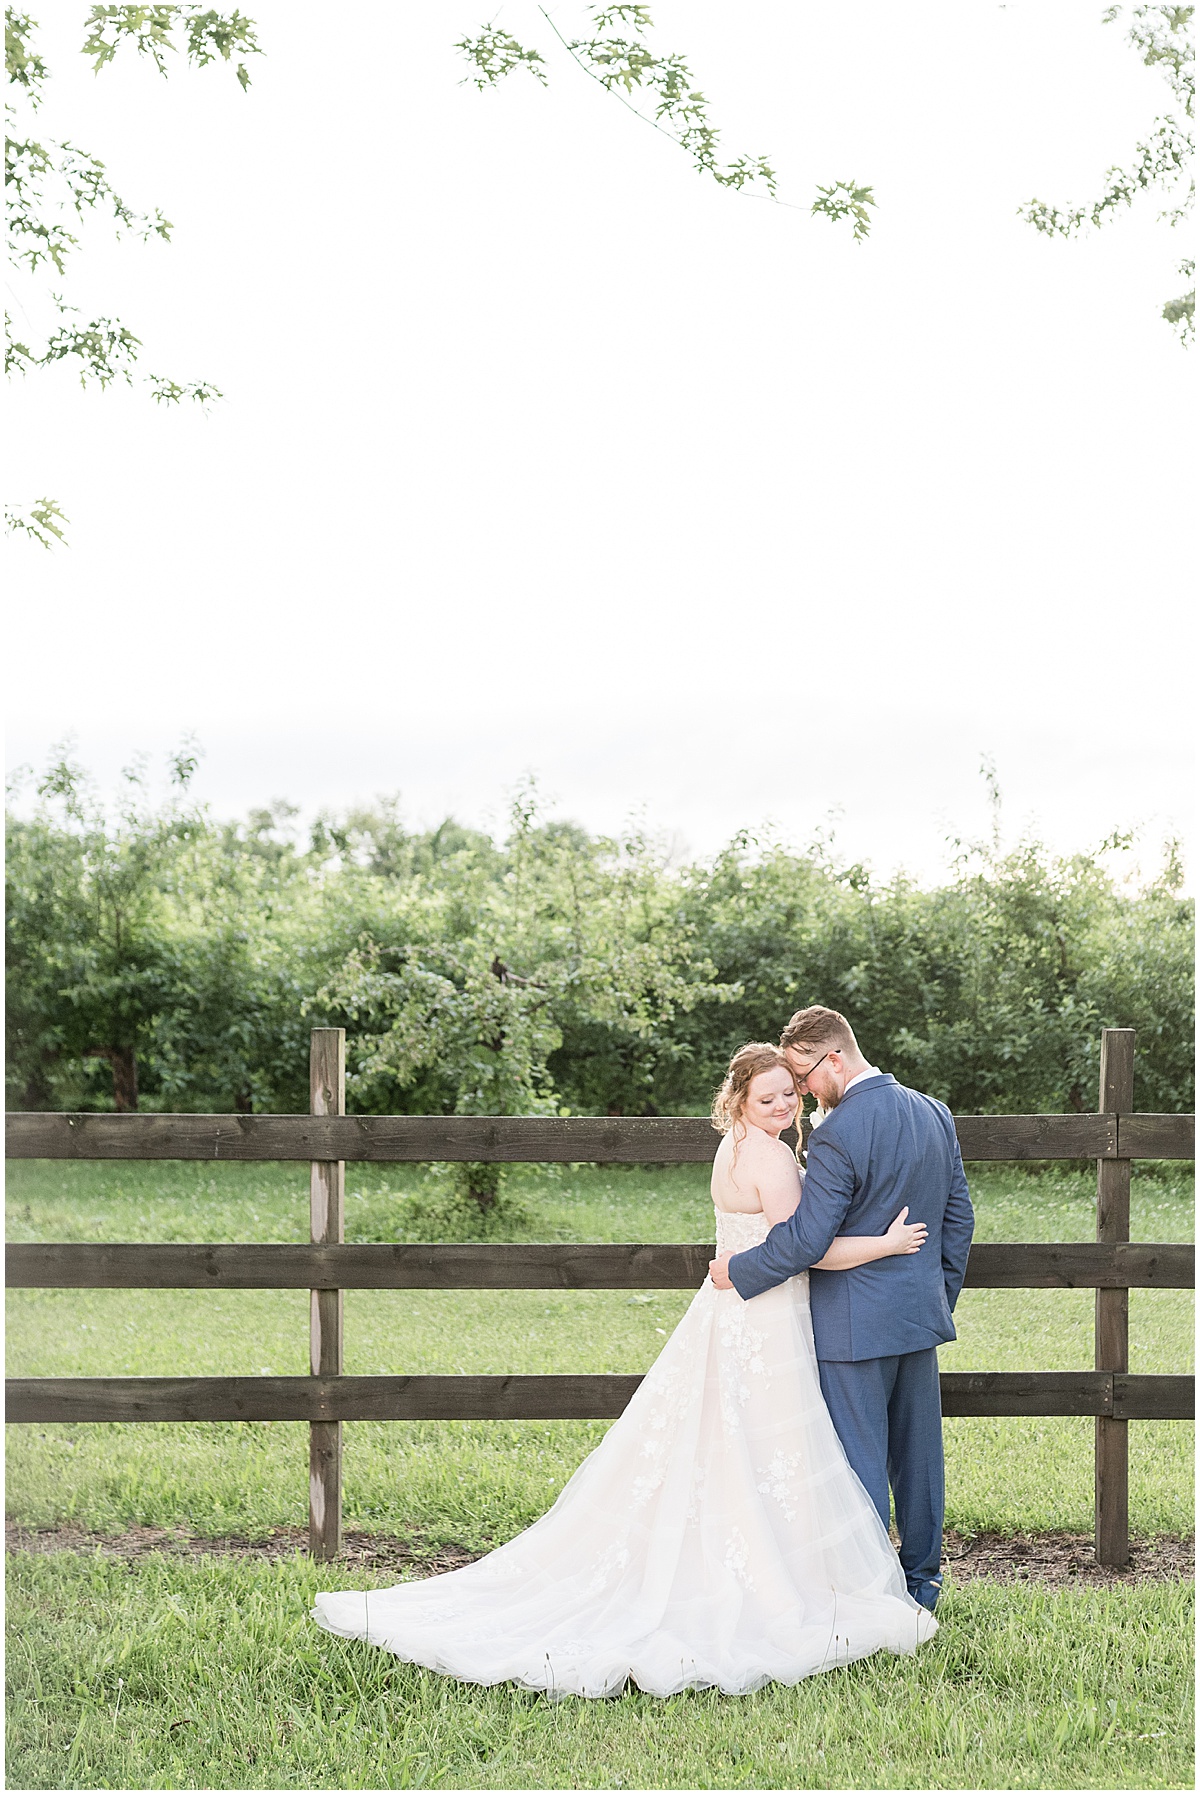 Bride and groom after County Line Orchard wedding photographed by Victoria Rayburn Photography